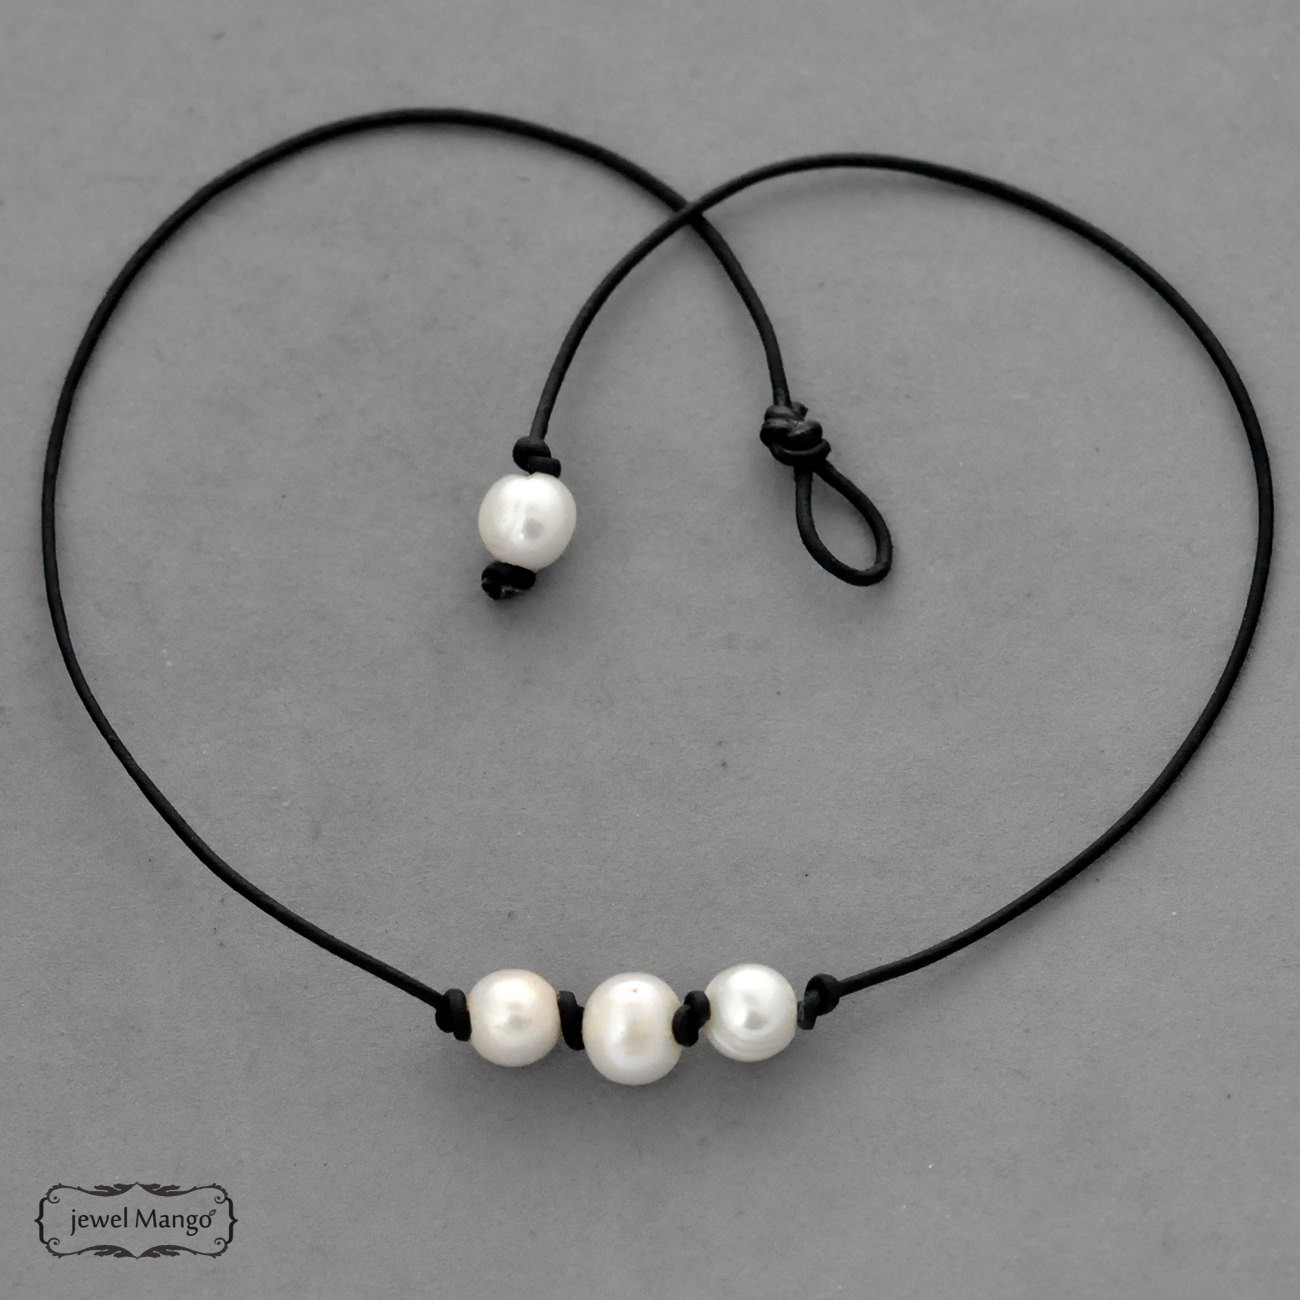 Leather Necklace With Pearl
 Triple pearl leather necklace pearl necklace black leather